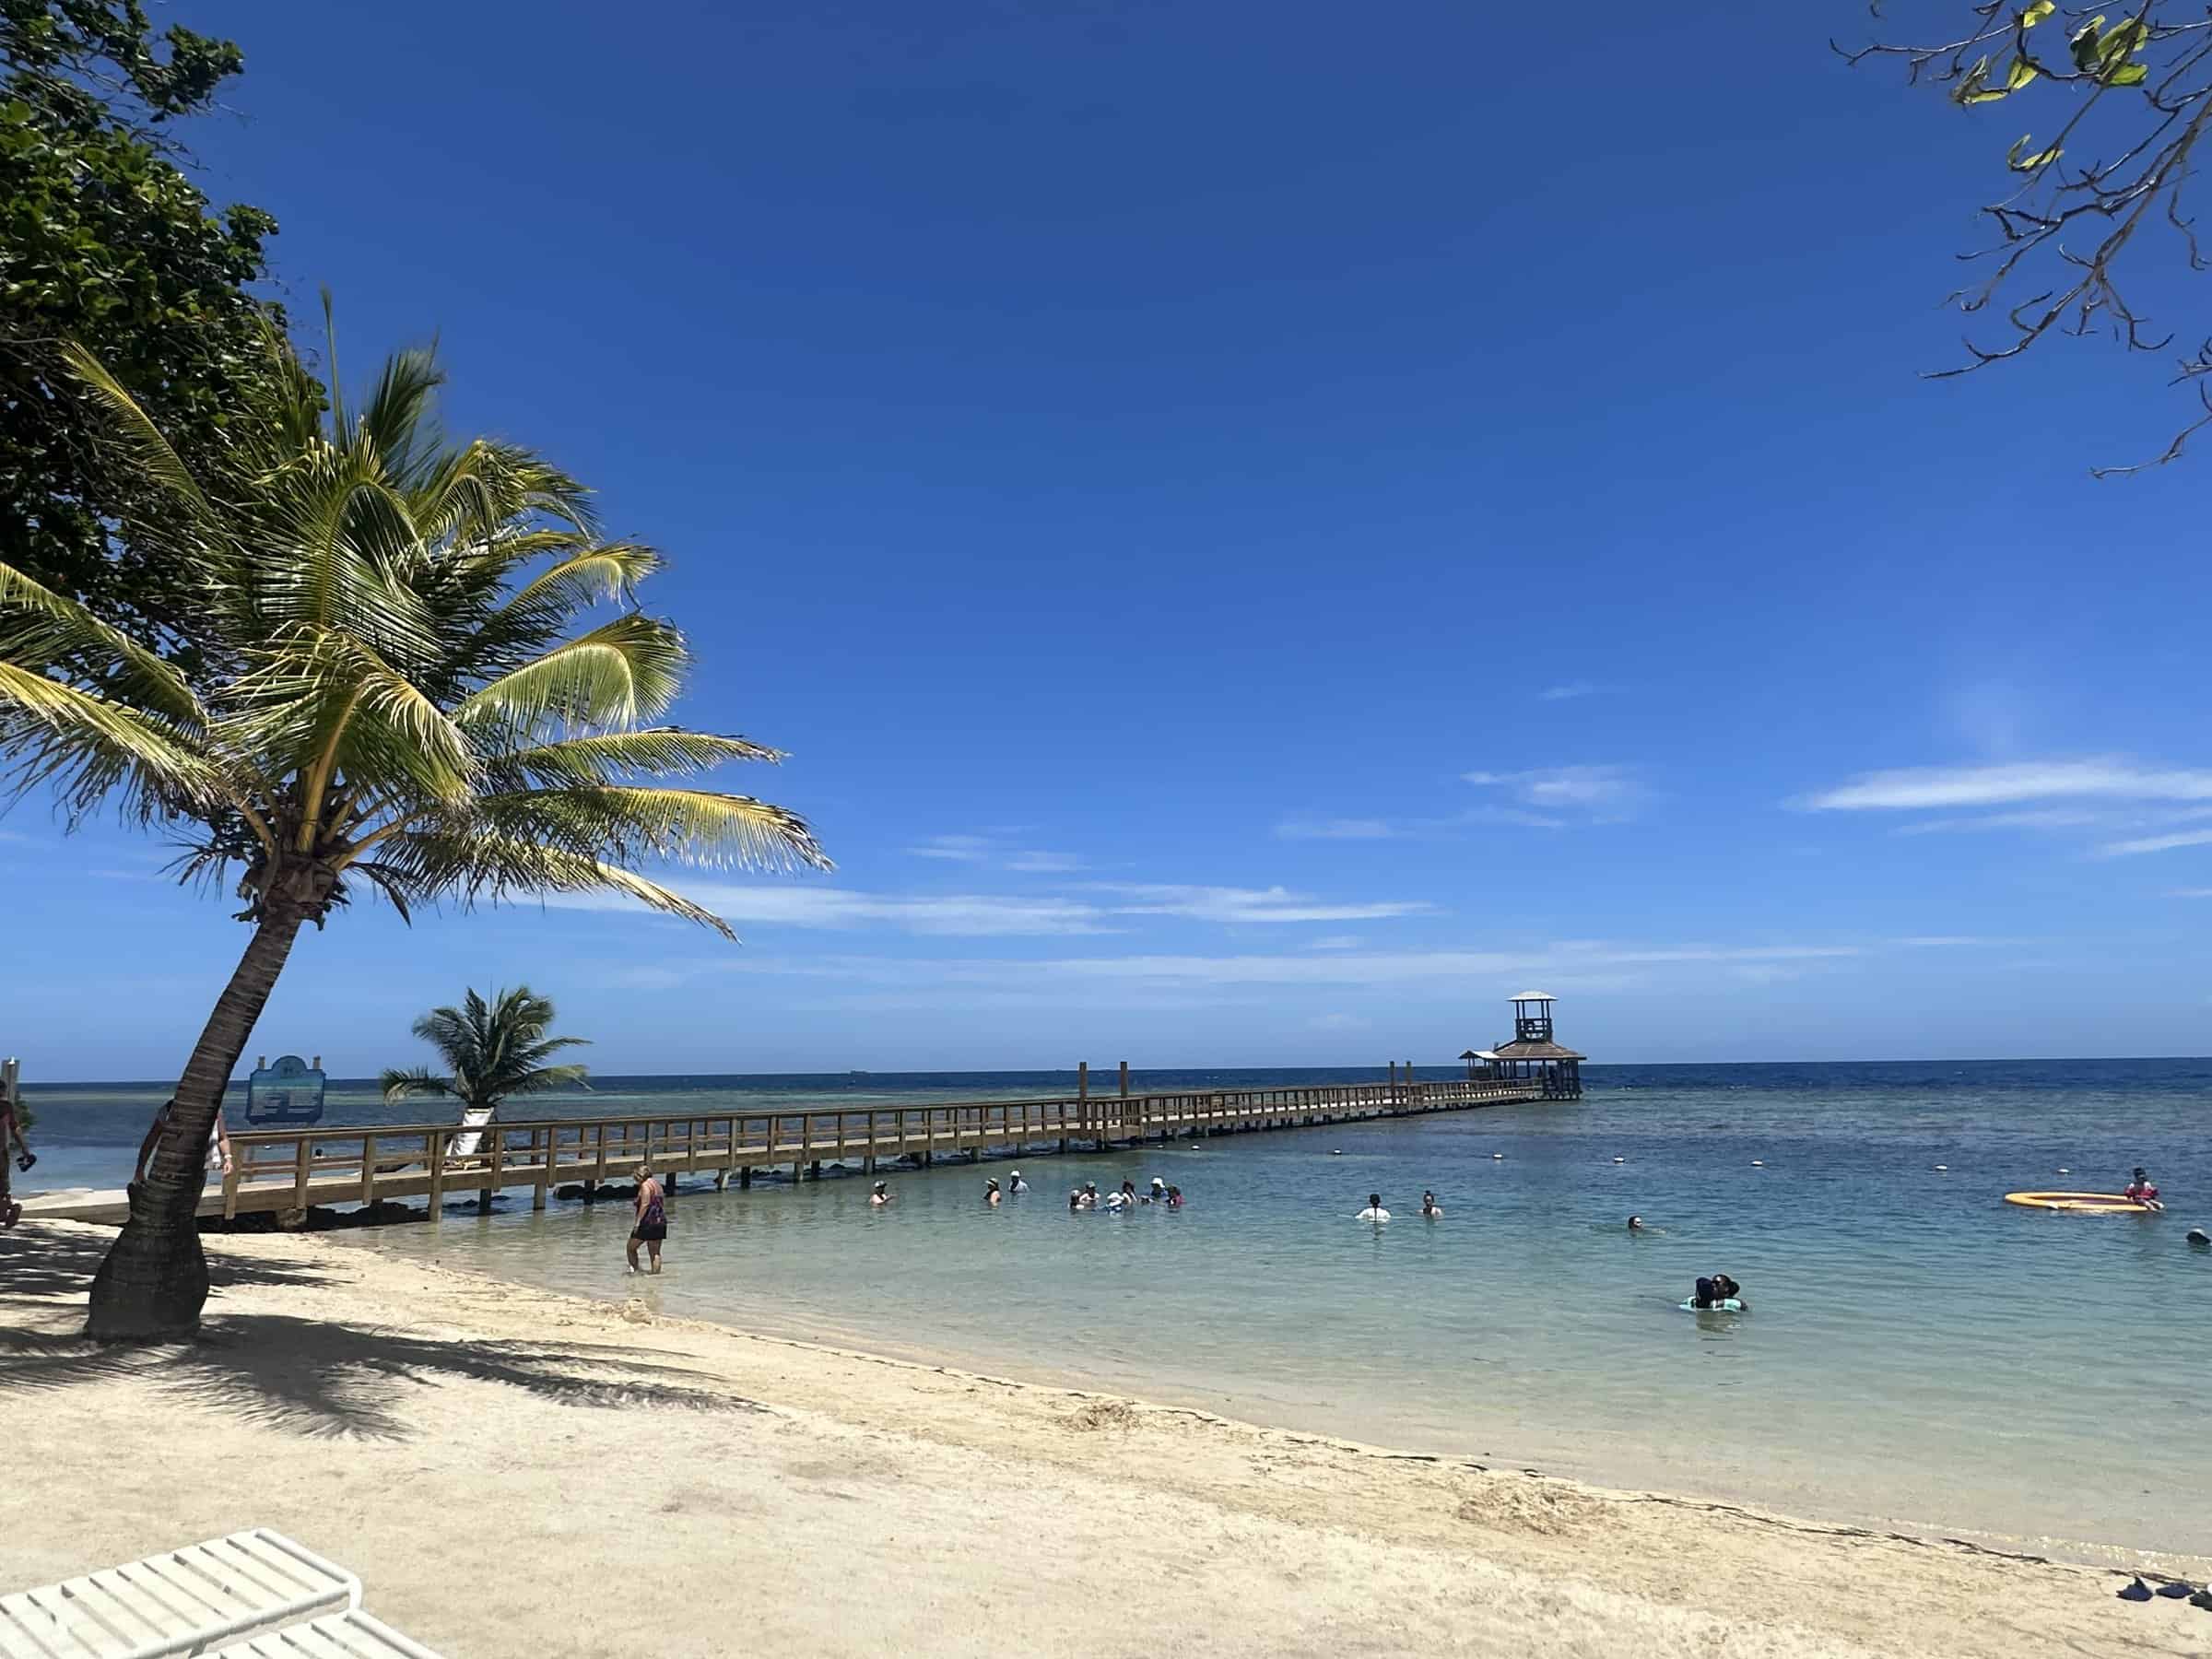 Clear day at Maya Key private island off Roatan, with visitors enjoying the calm turquoise waters near a wooden pier, a single palm tree adding tropical charm to the sun-kissed sandy beach